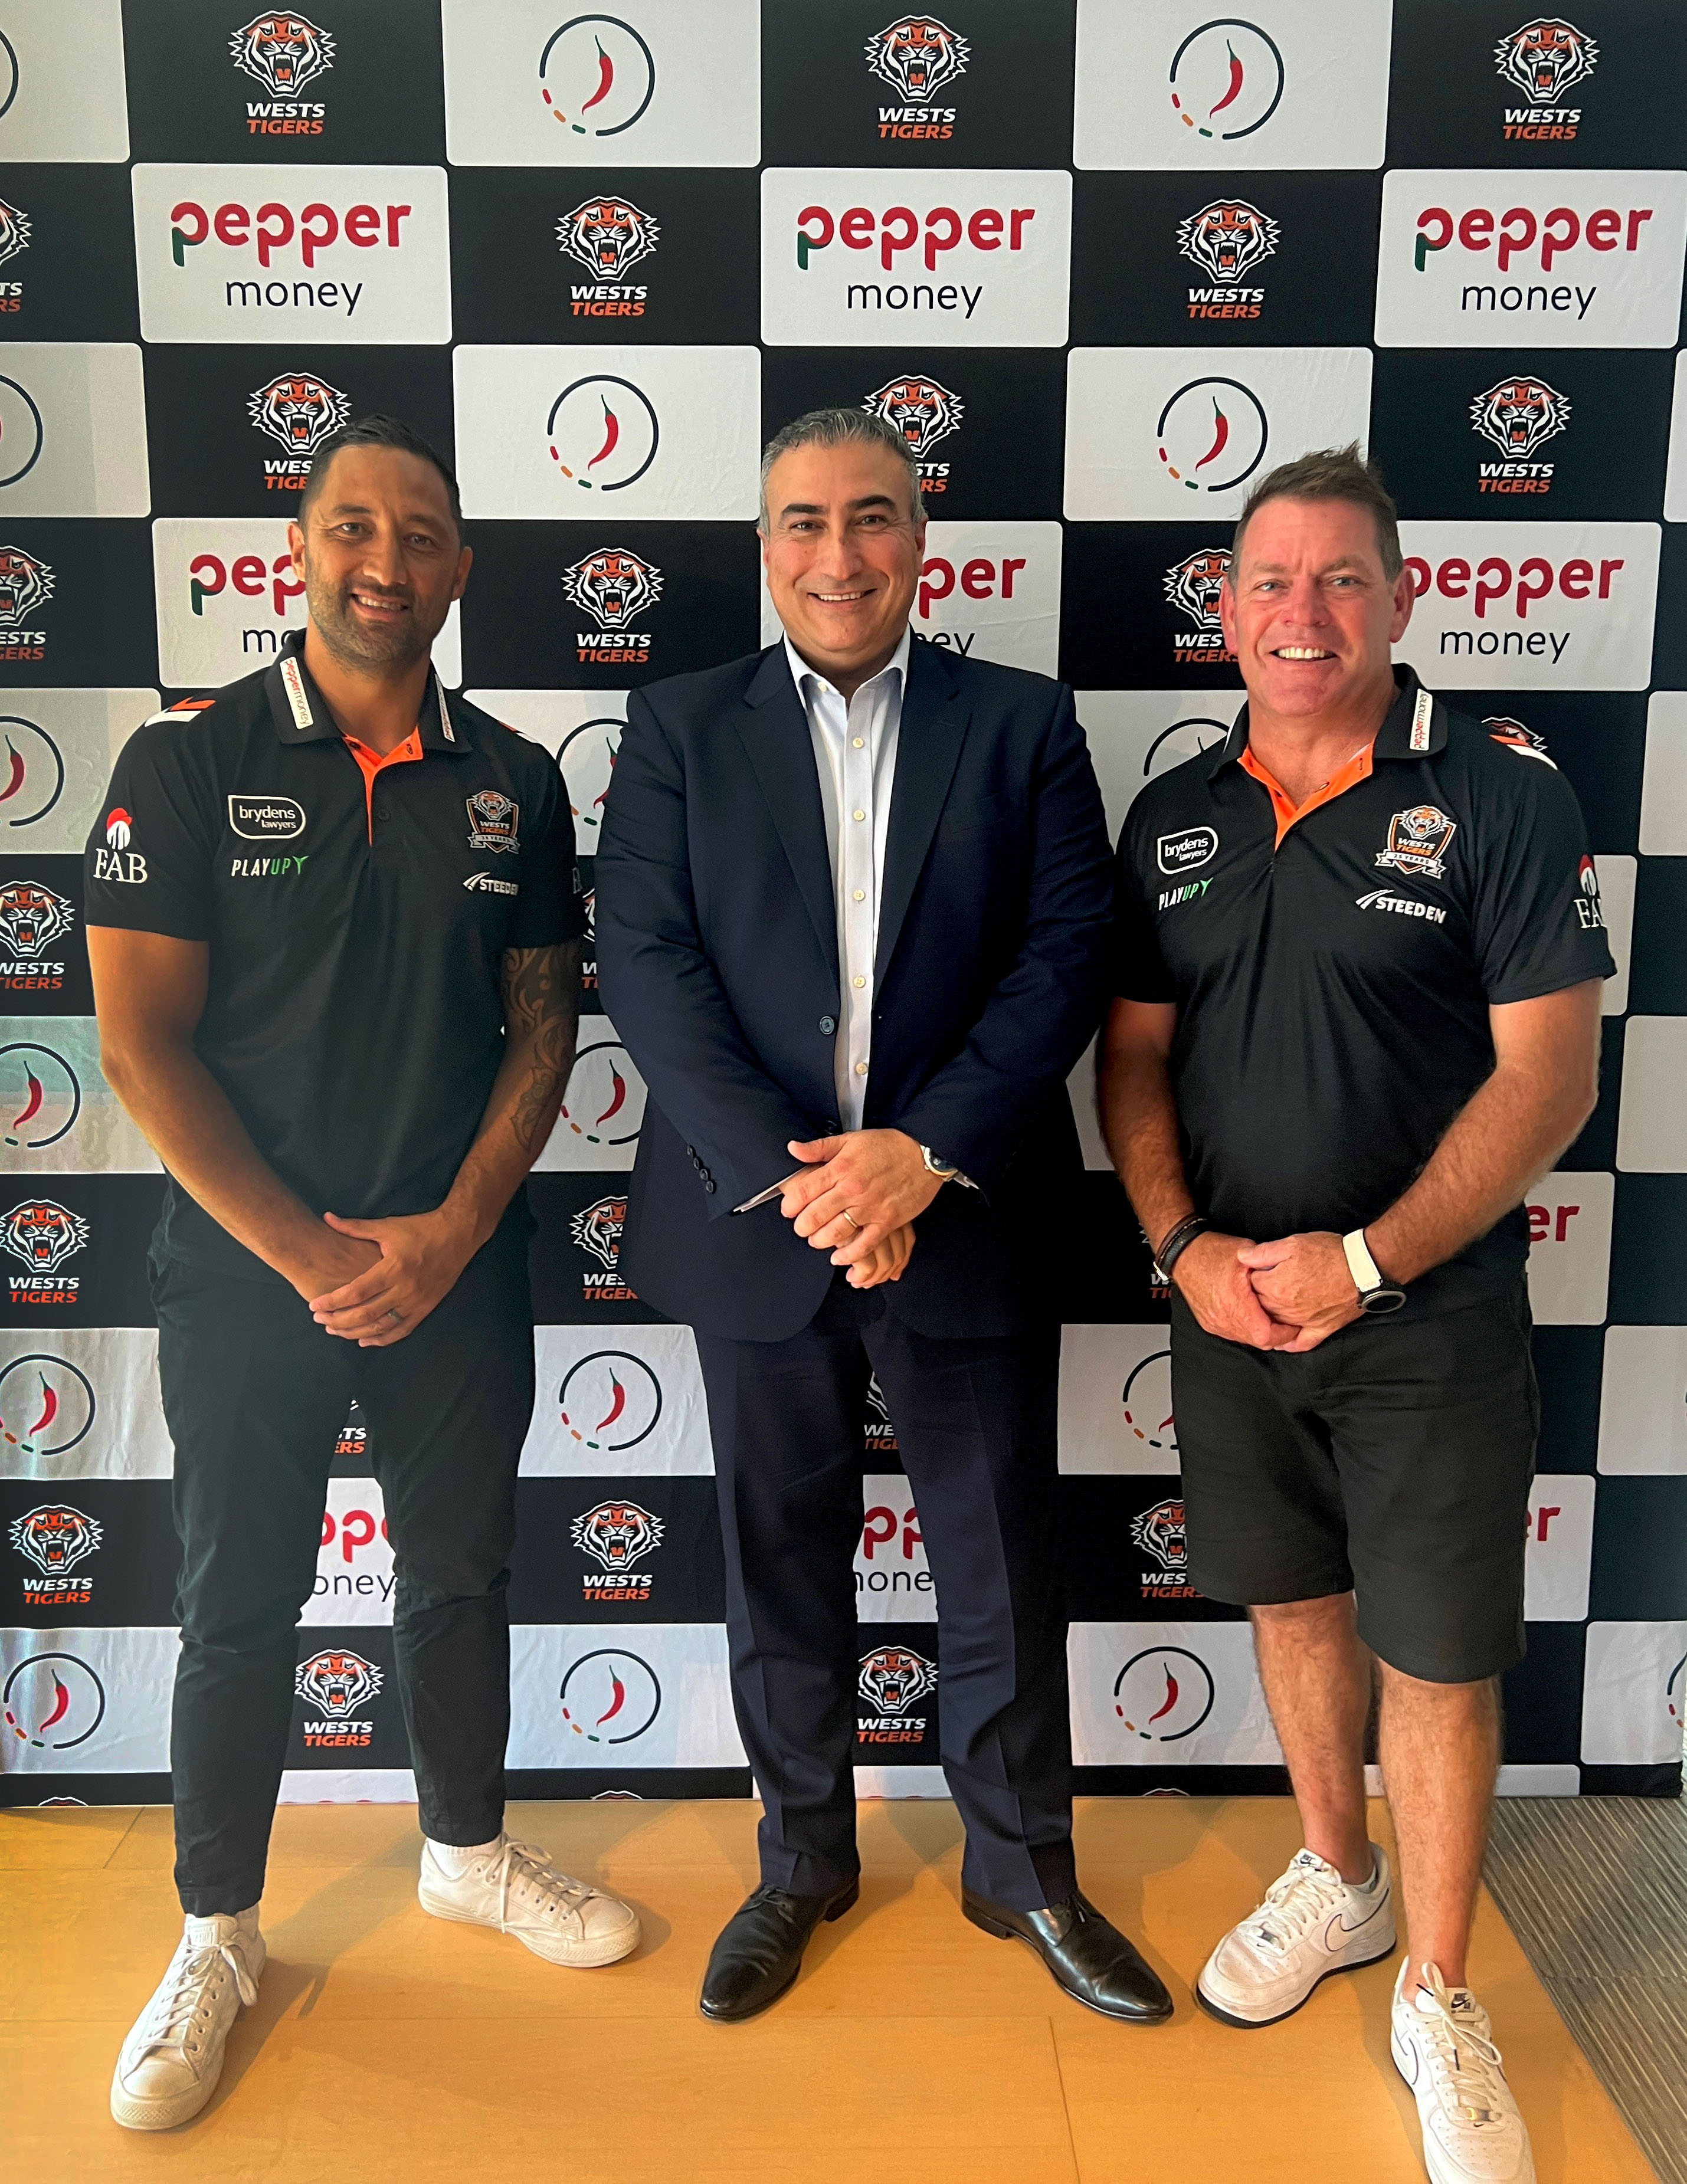 Pepper Money CEO with Wests Tigers